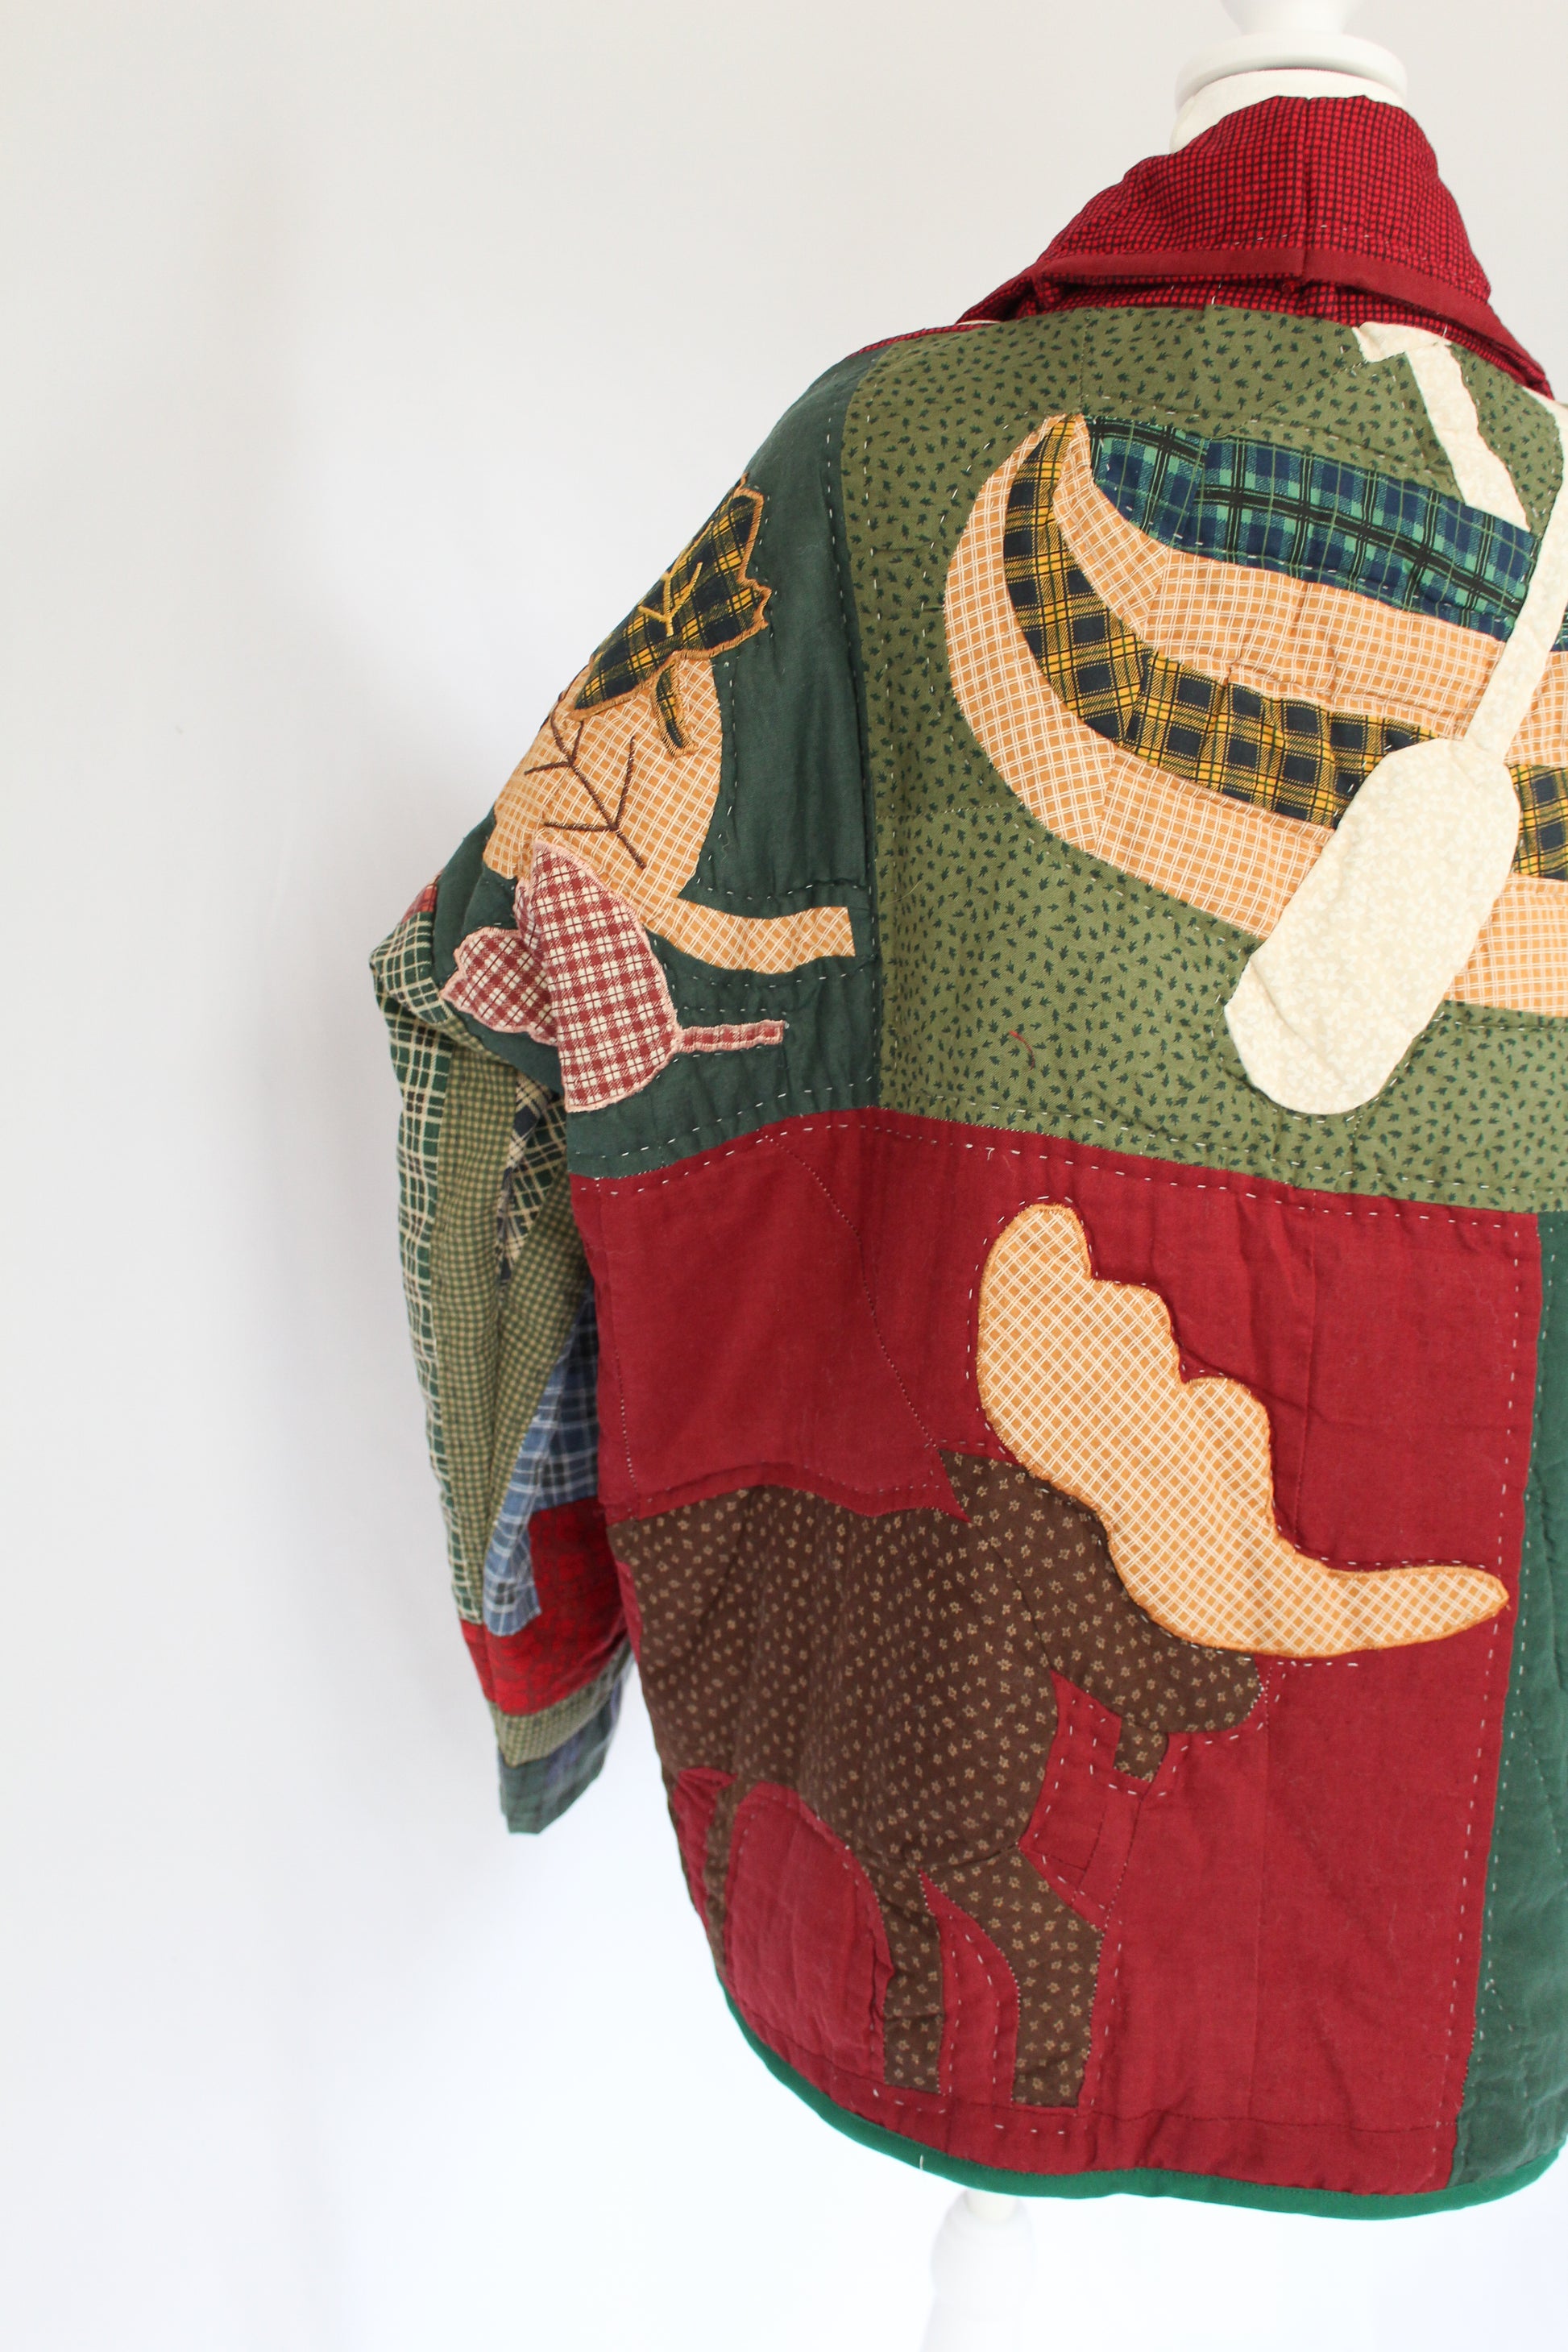 moose on the back of a quilt jacket, along with a canoe and leaves